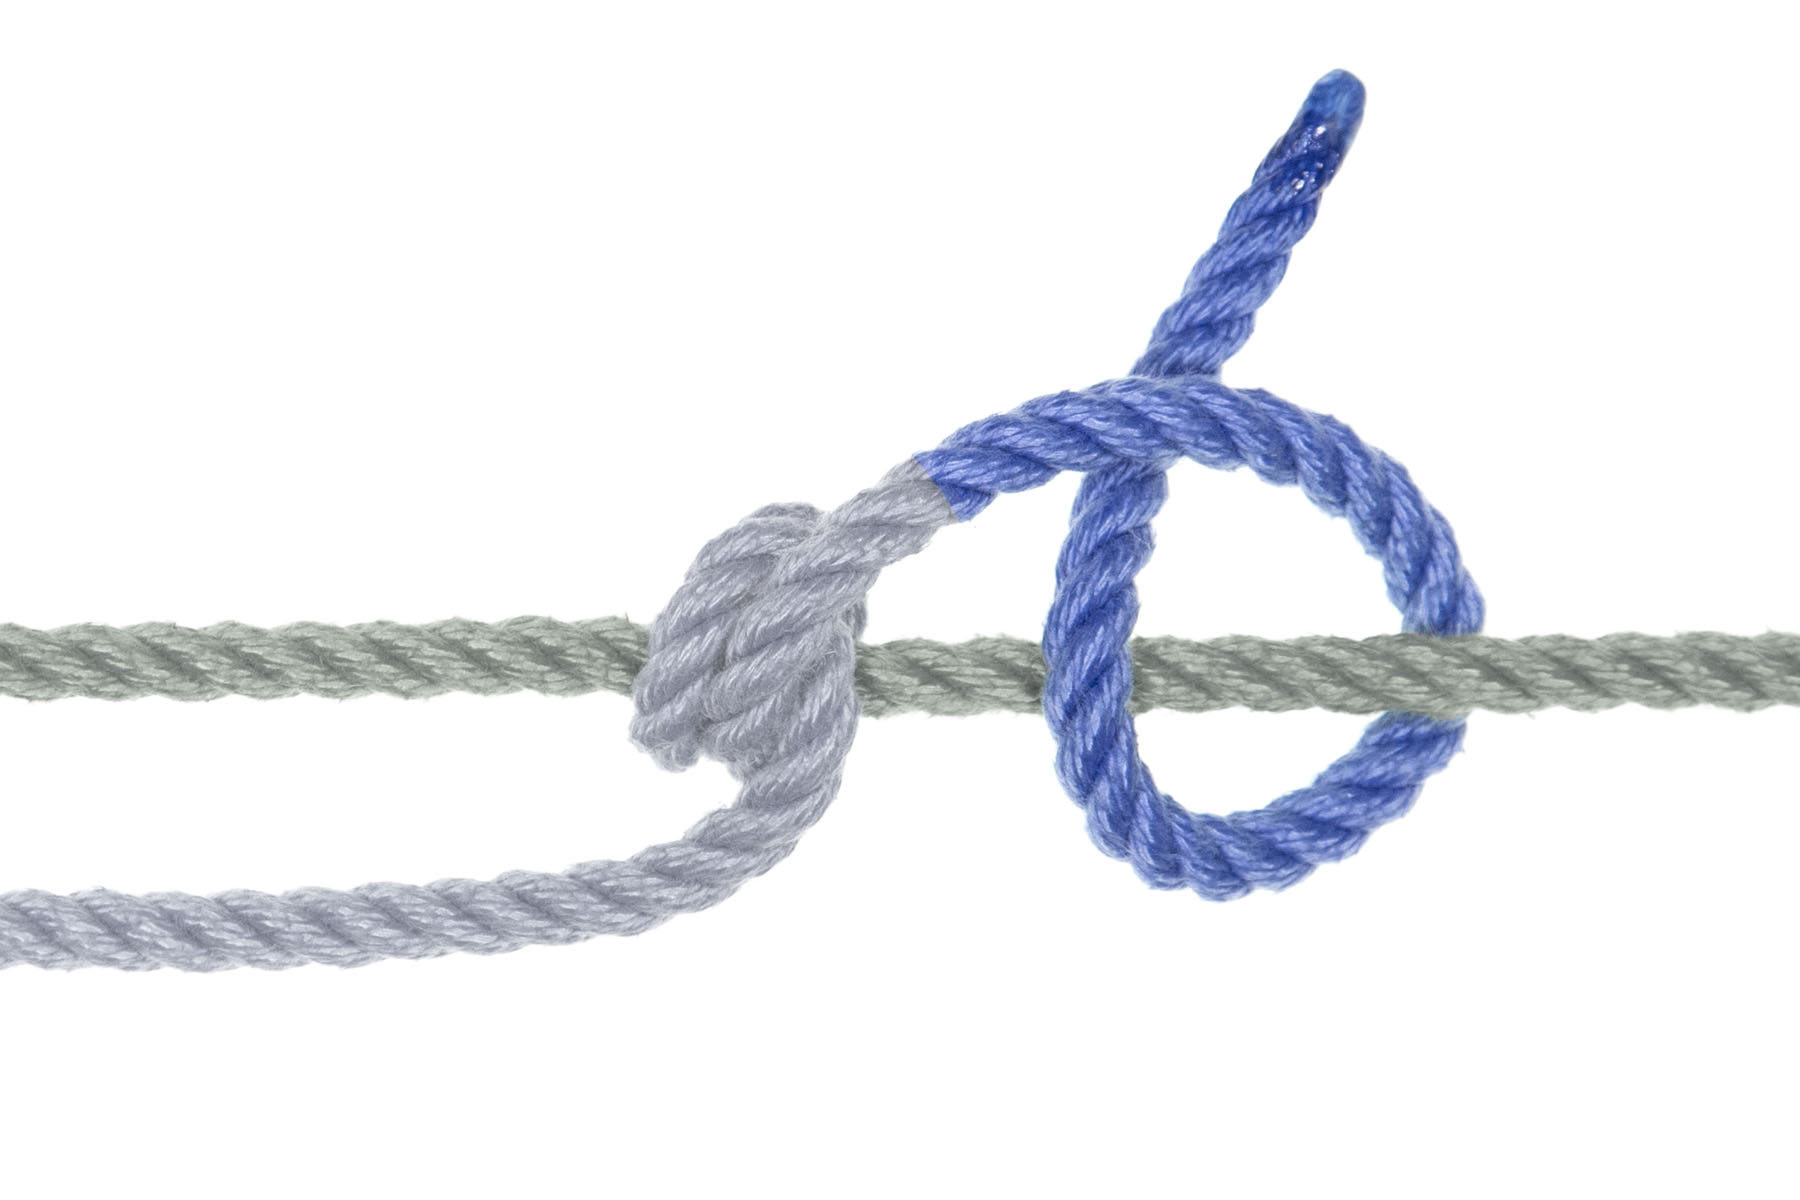 The end of the blue rope travels a few inches to the right and then crosses under the green rope, over the green rope, and under itself, making a half hitch around the green rope.